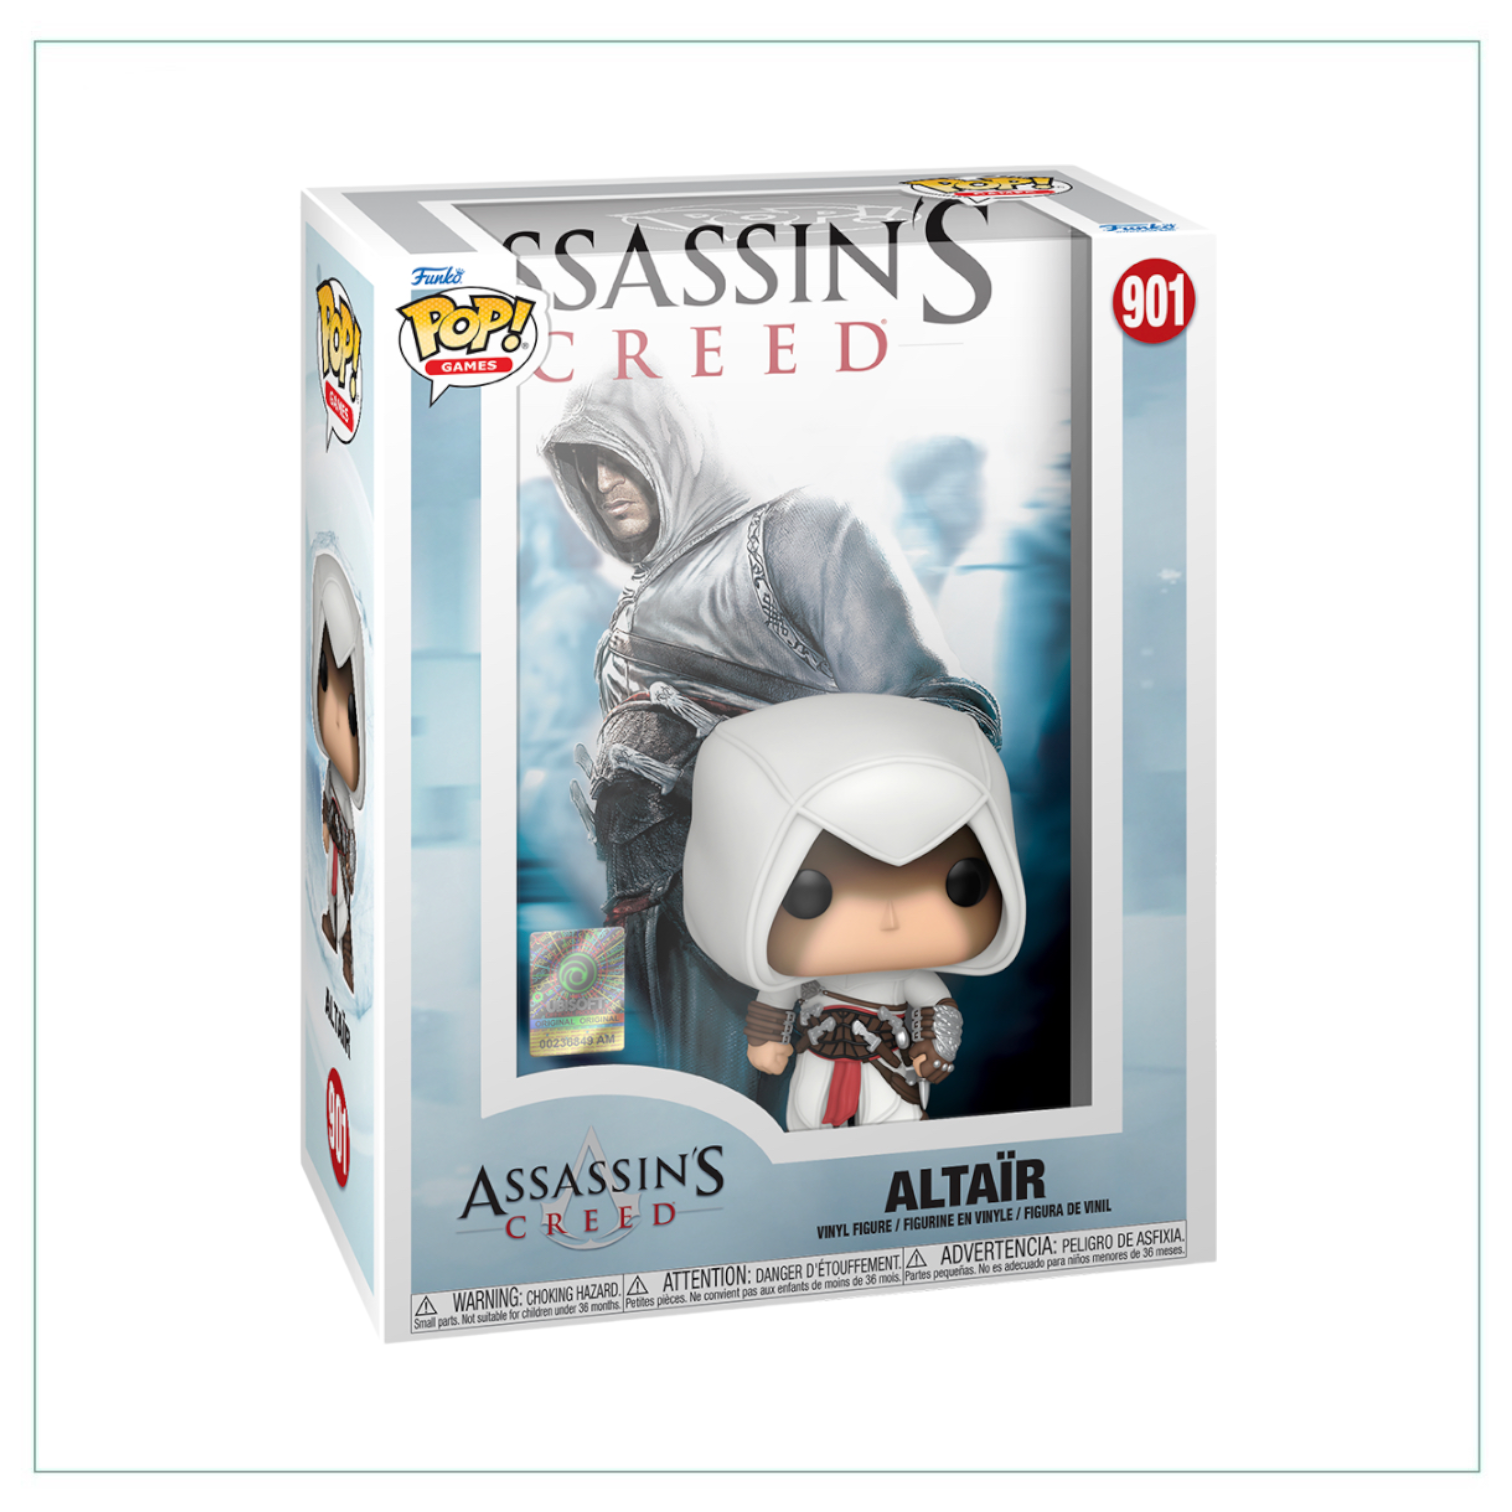 Altair #901 Funko Pop! Game Cover Assassins Creed - PREORDER